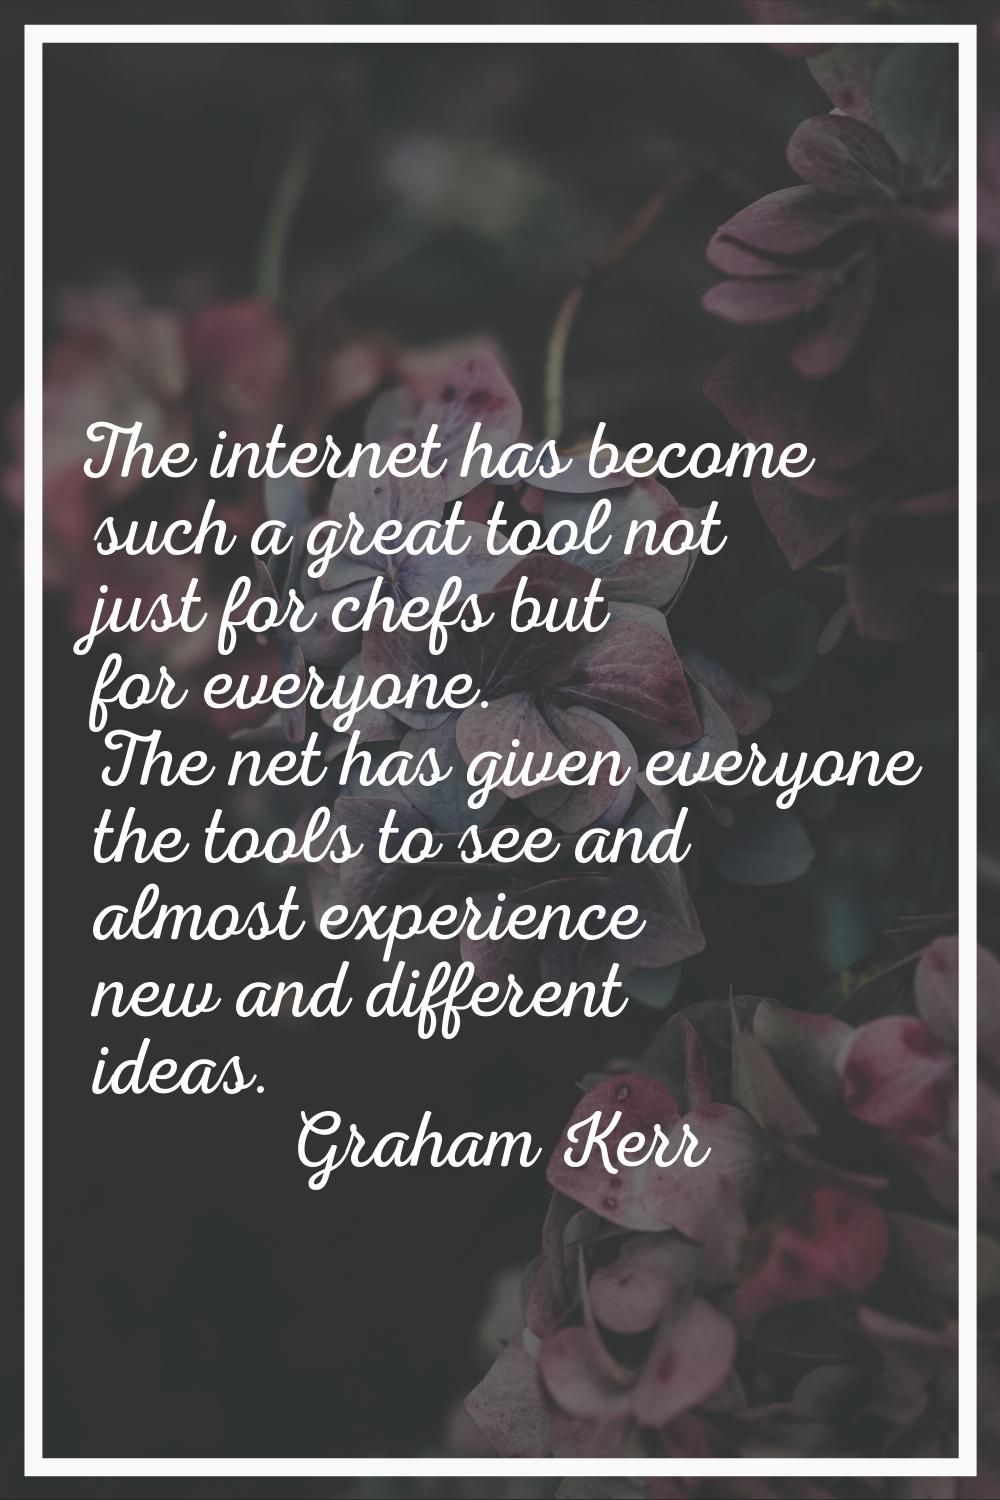 The internet has become such a great tool not just for chefs but for everyone. The net has given ev